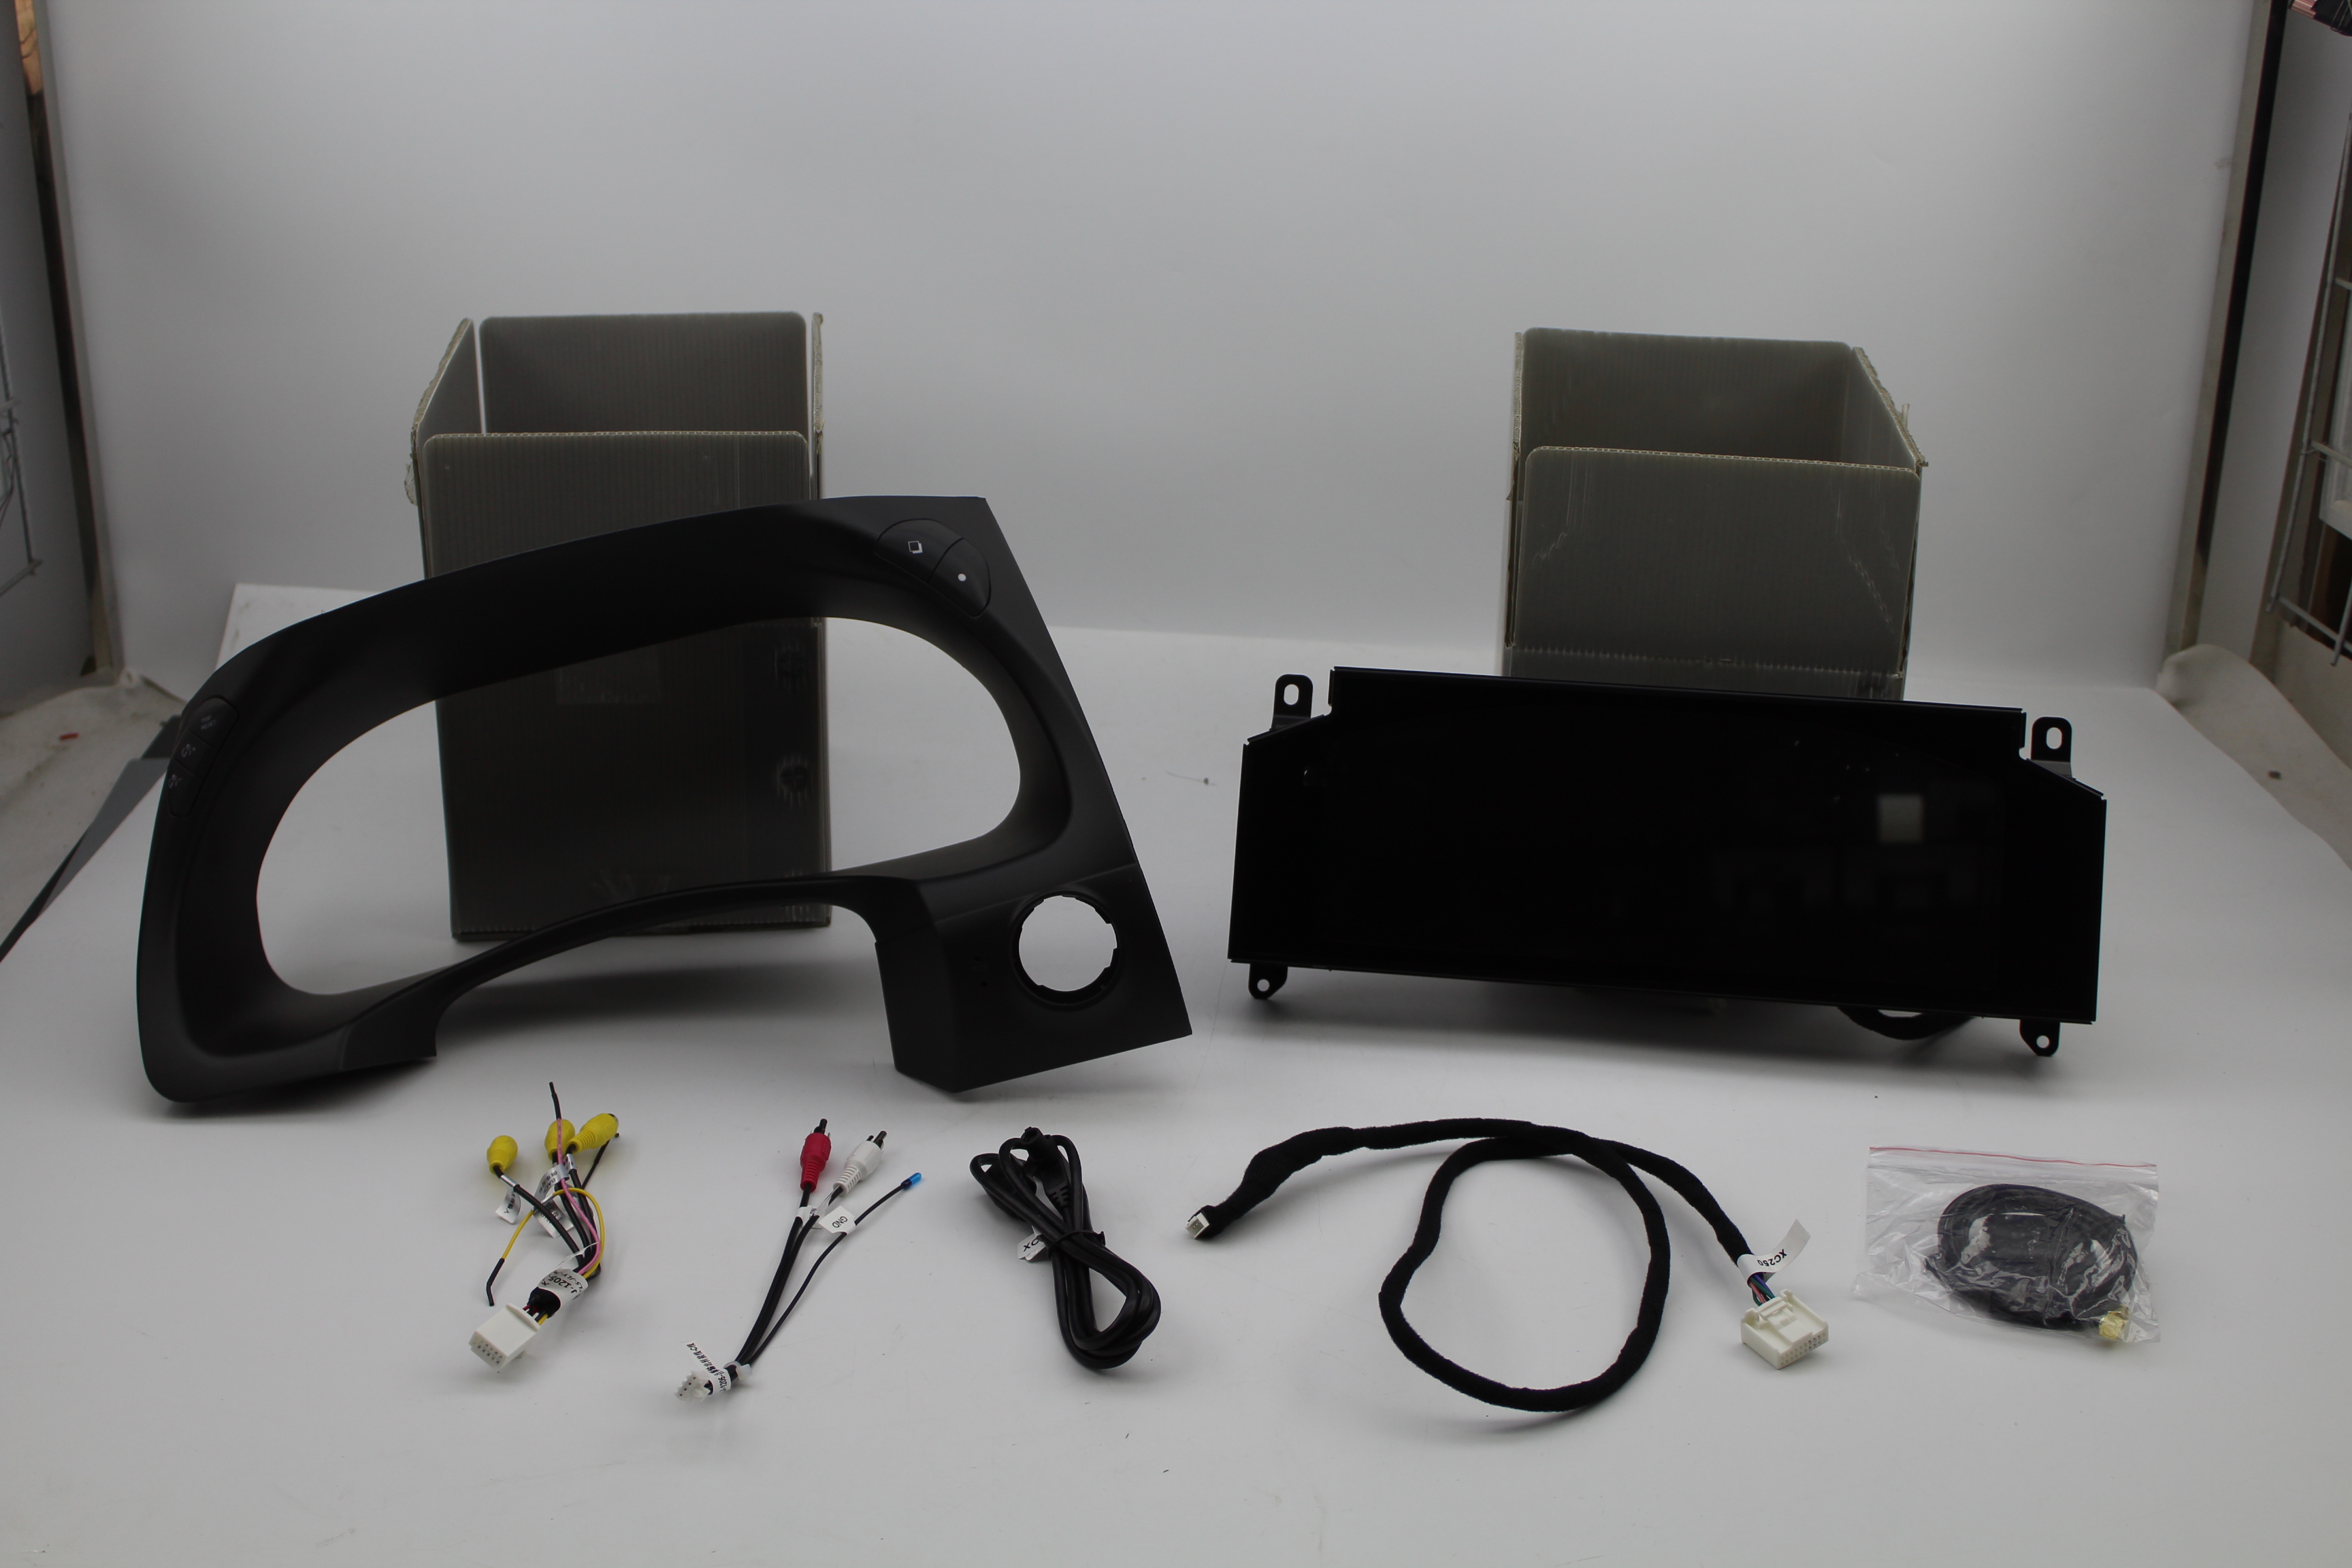 LCD Instrument Cluster for nissan patrol Y62